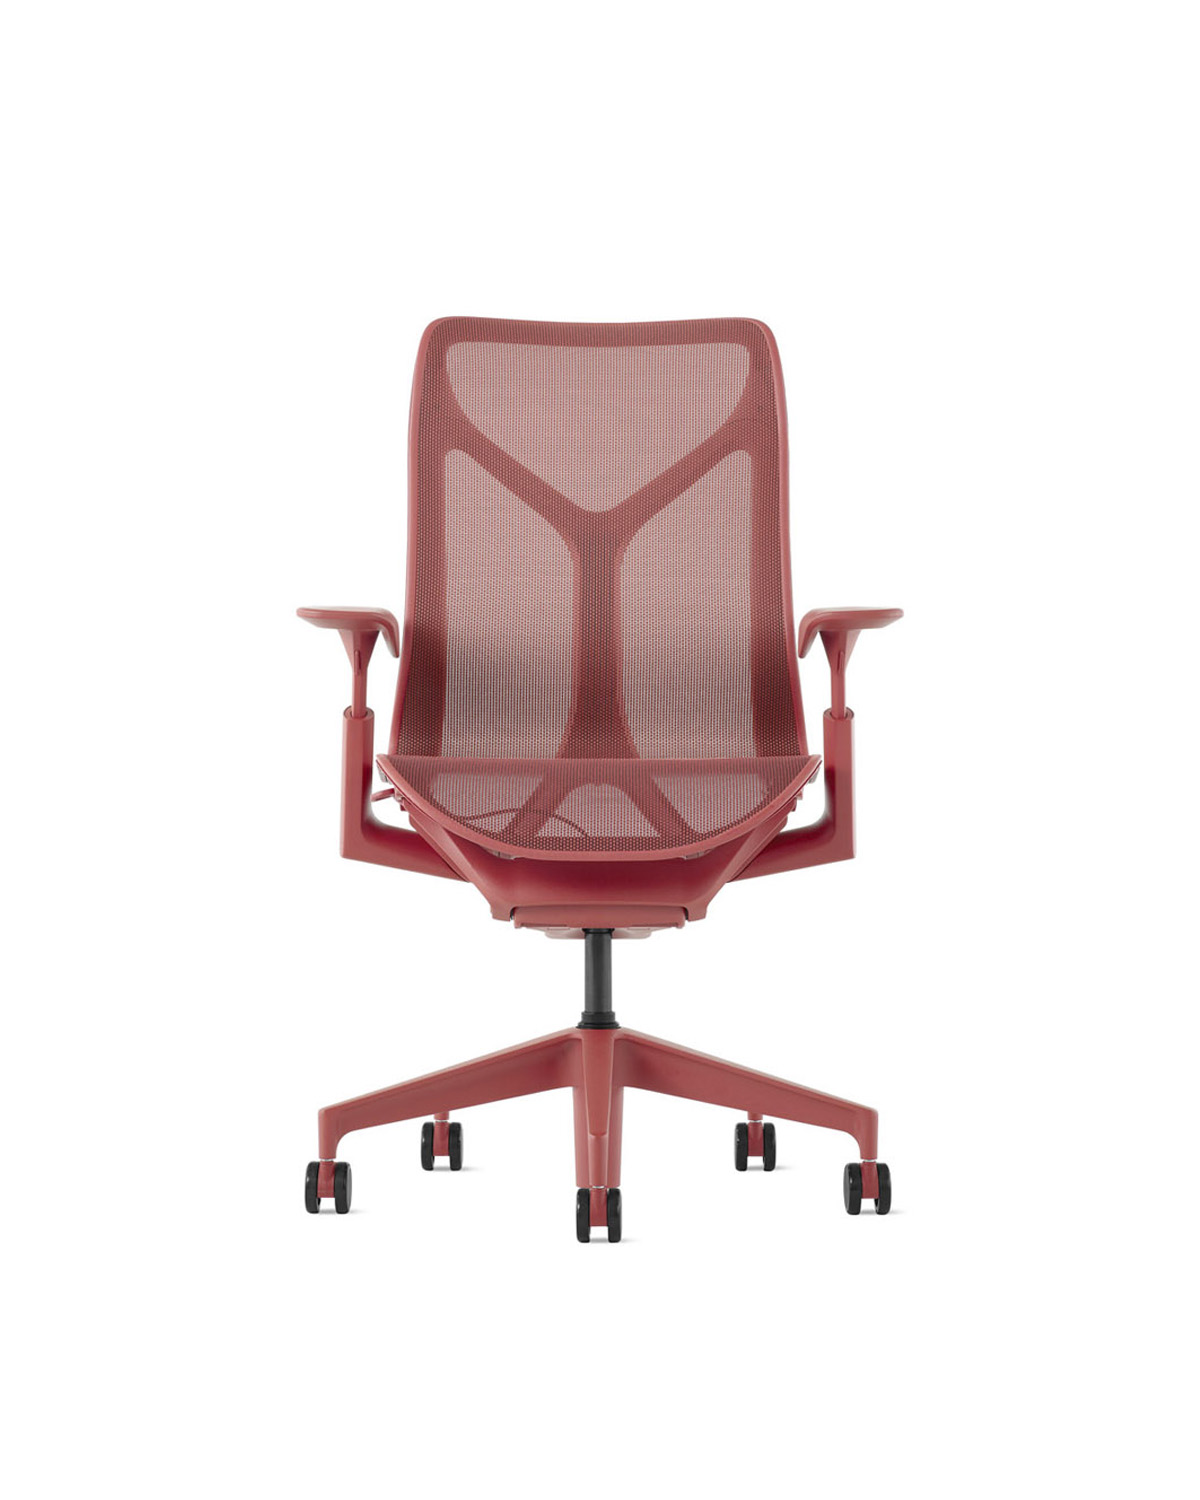 Ergonomic Office Chairs Features You Need To Know